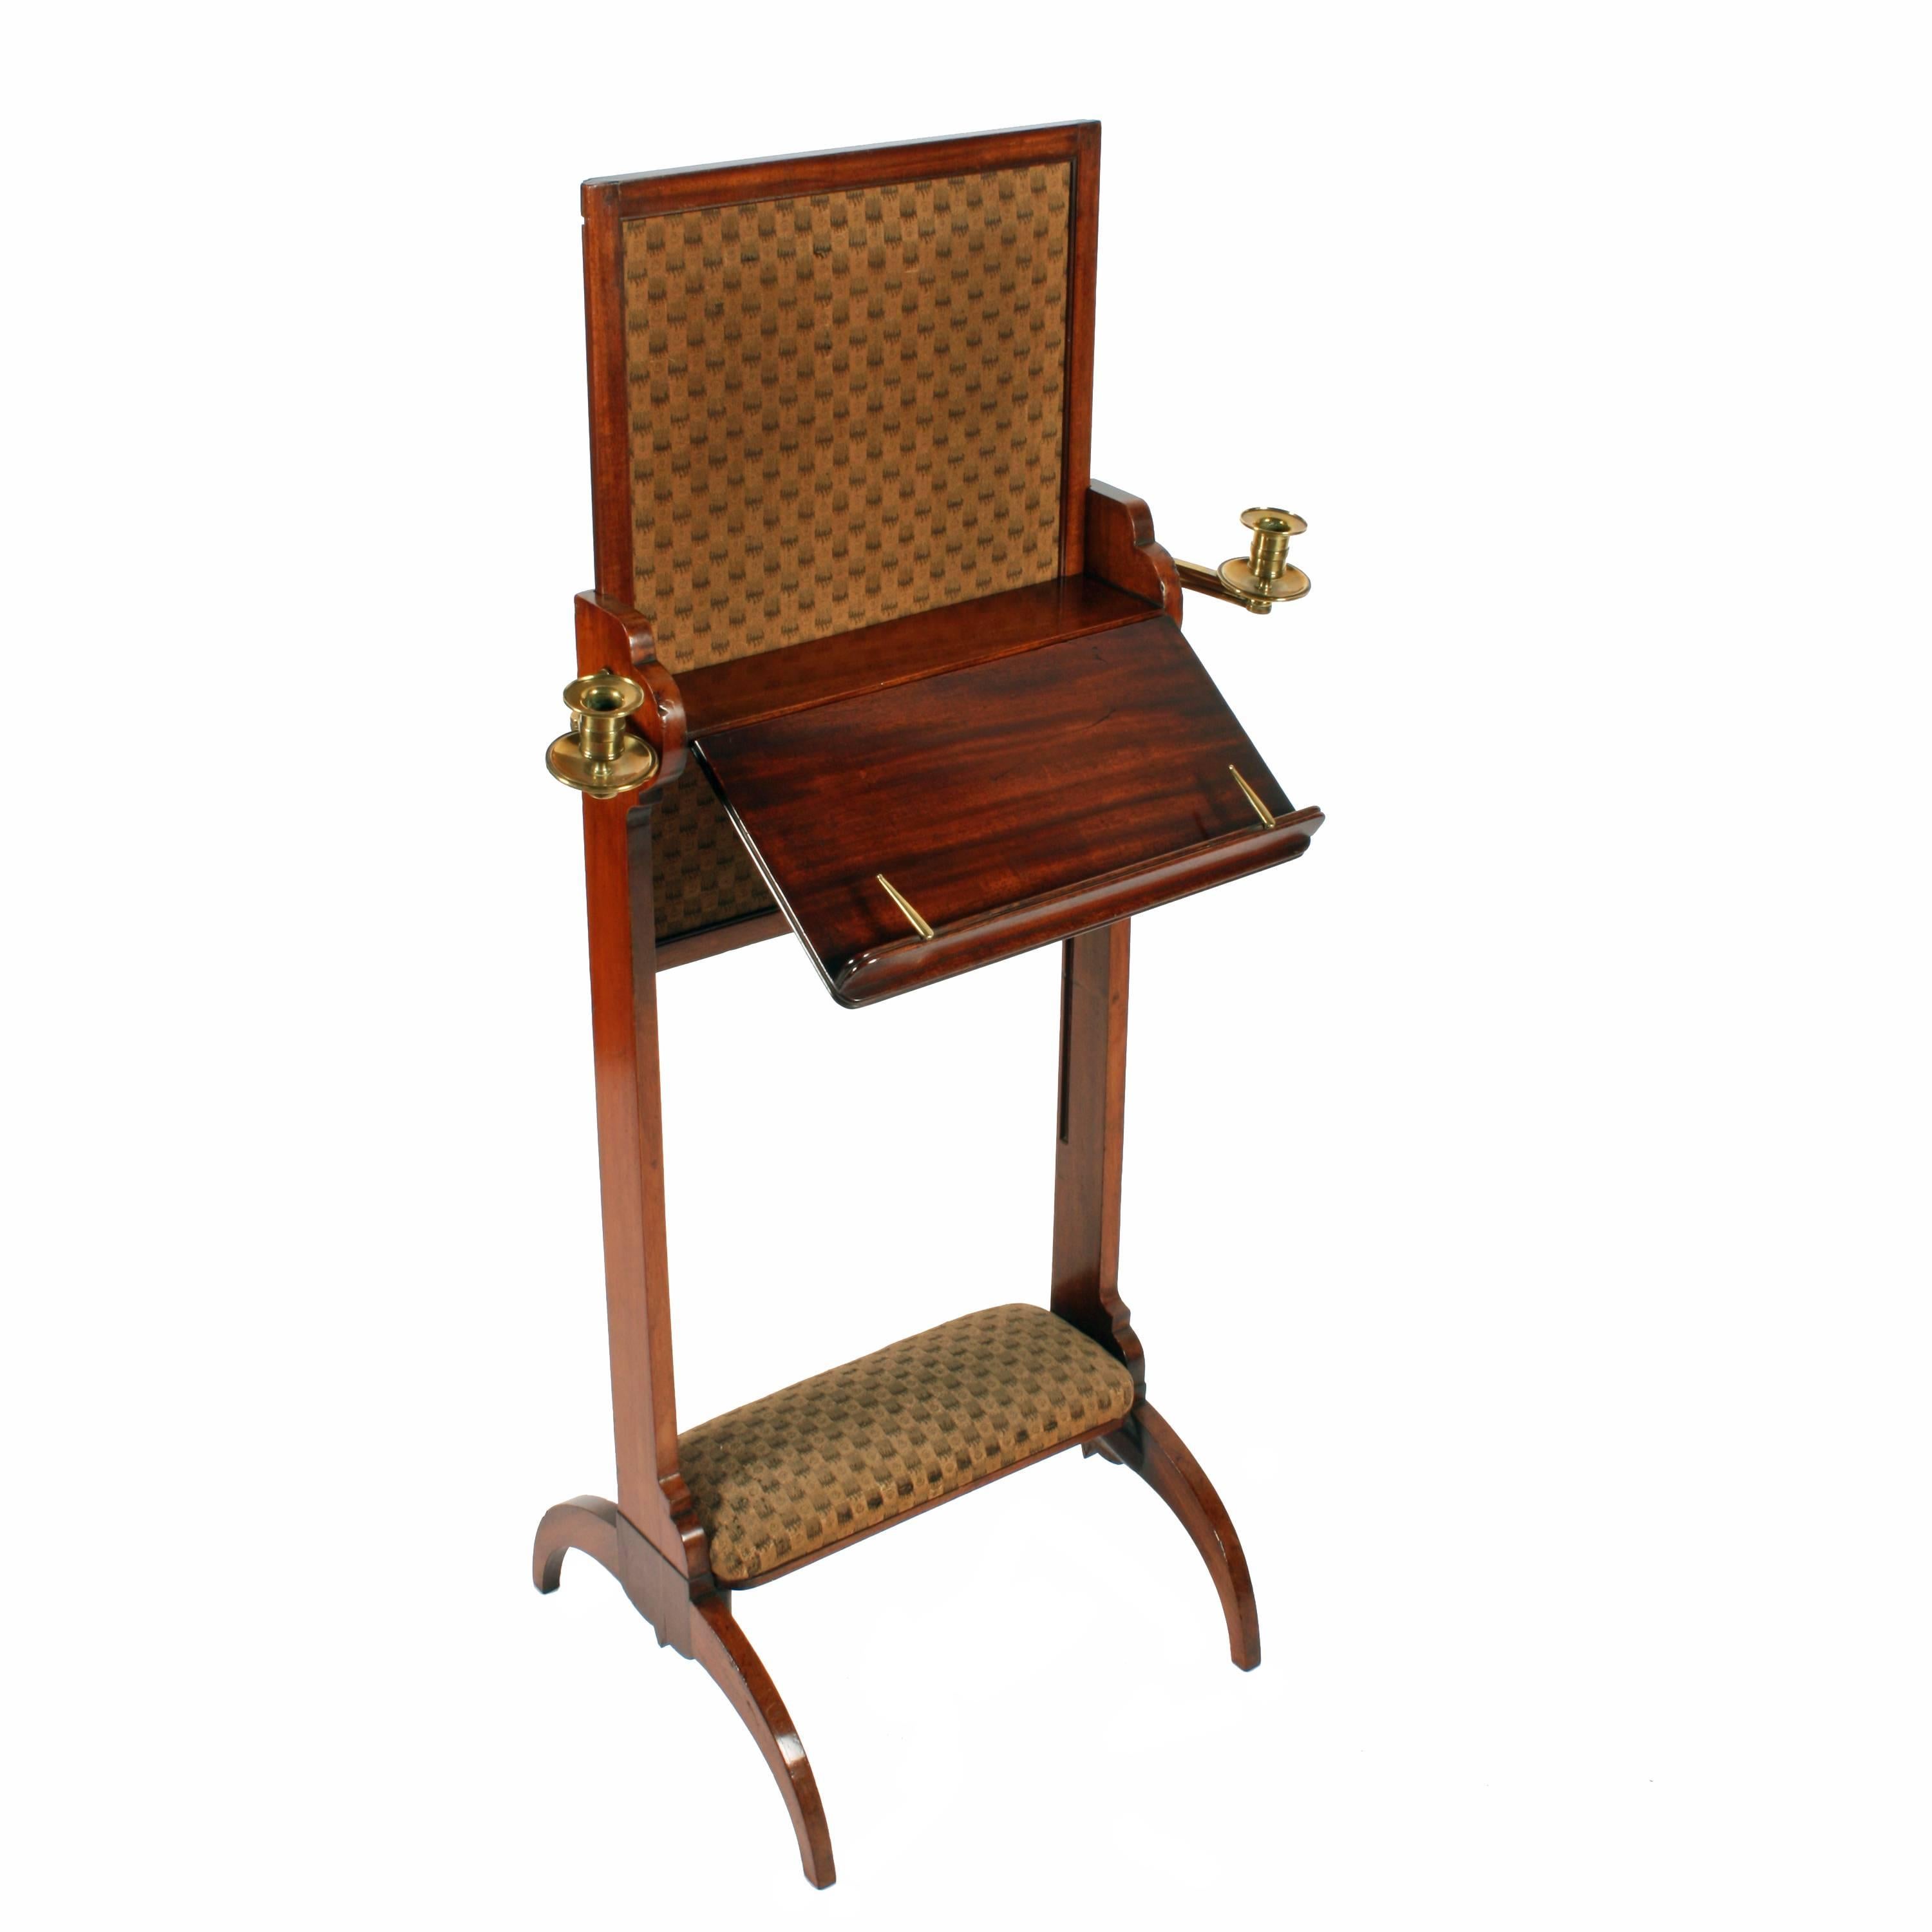 George IV mahogany adjustable combined music stand, fire screen and foot rest, circa 1820. With adjustable, mahogany framed fabric section to the back and two adjustable candle holders in brass and polished shelf top. The music stand has a small